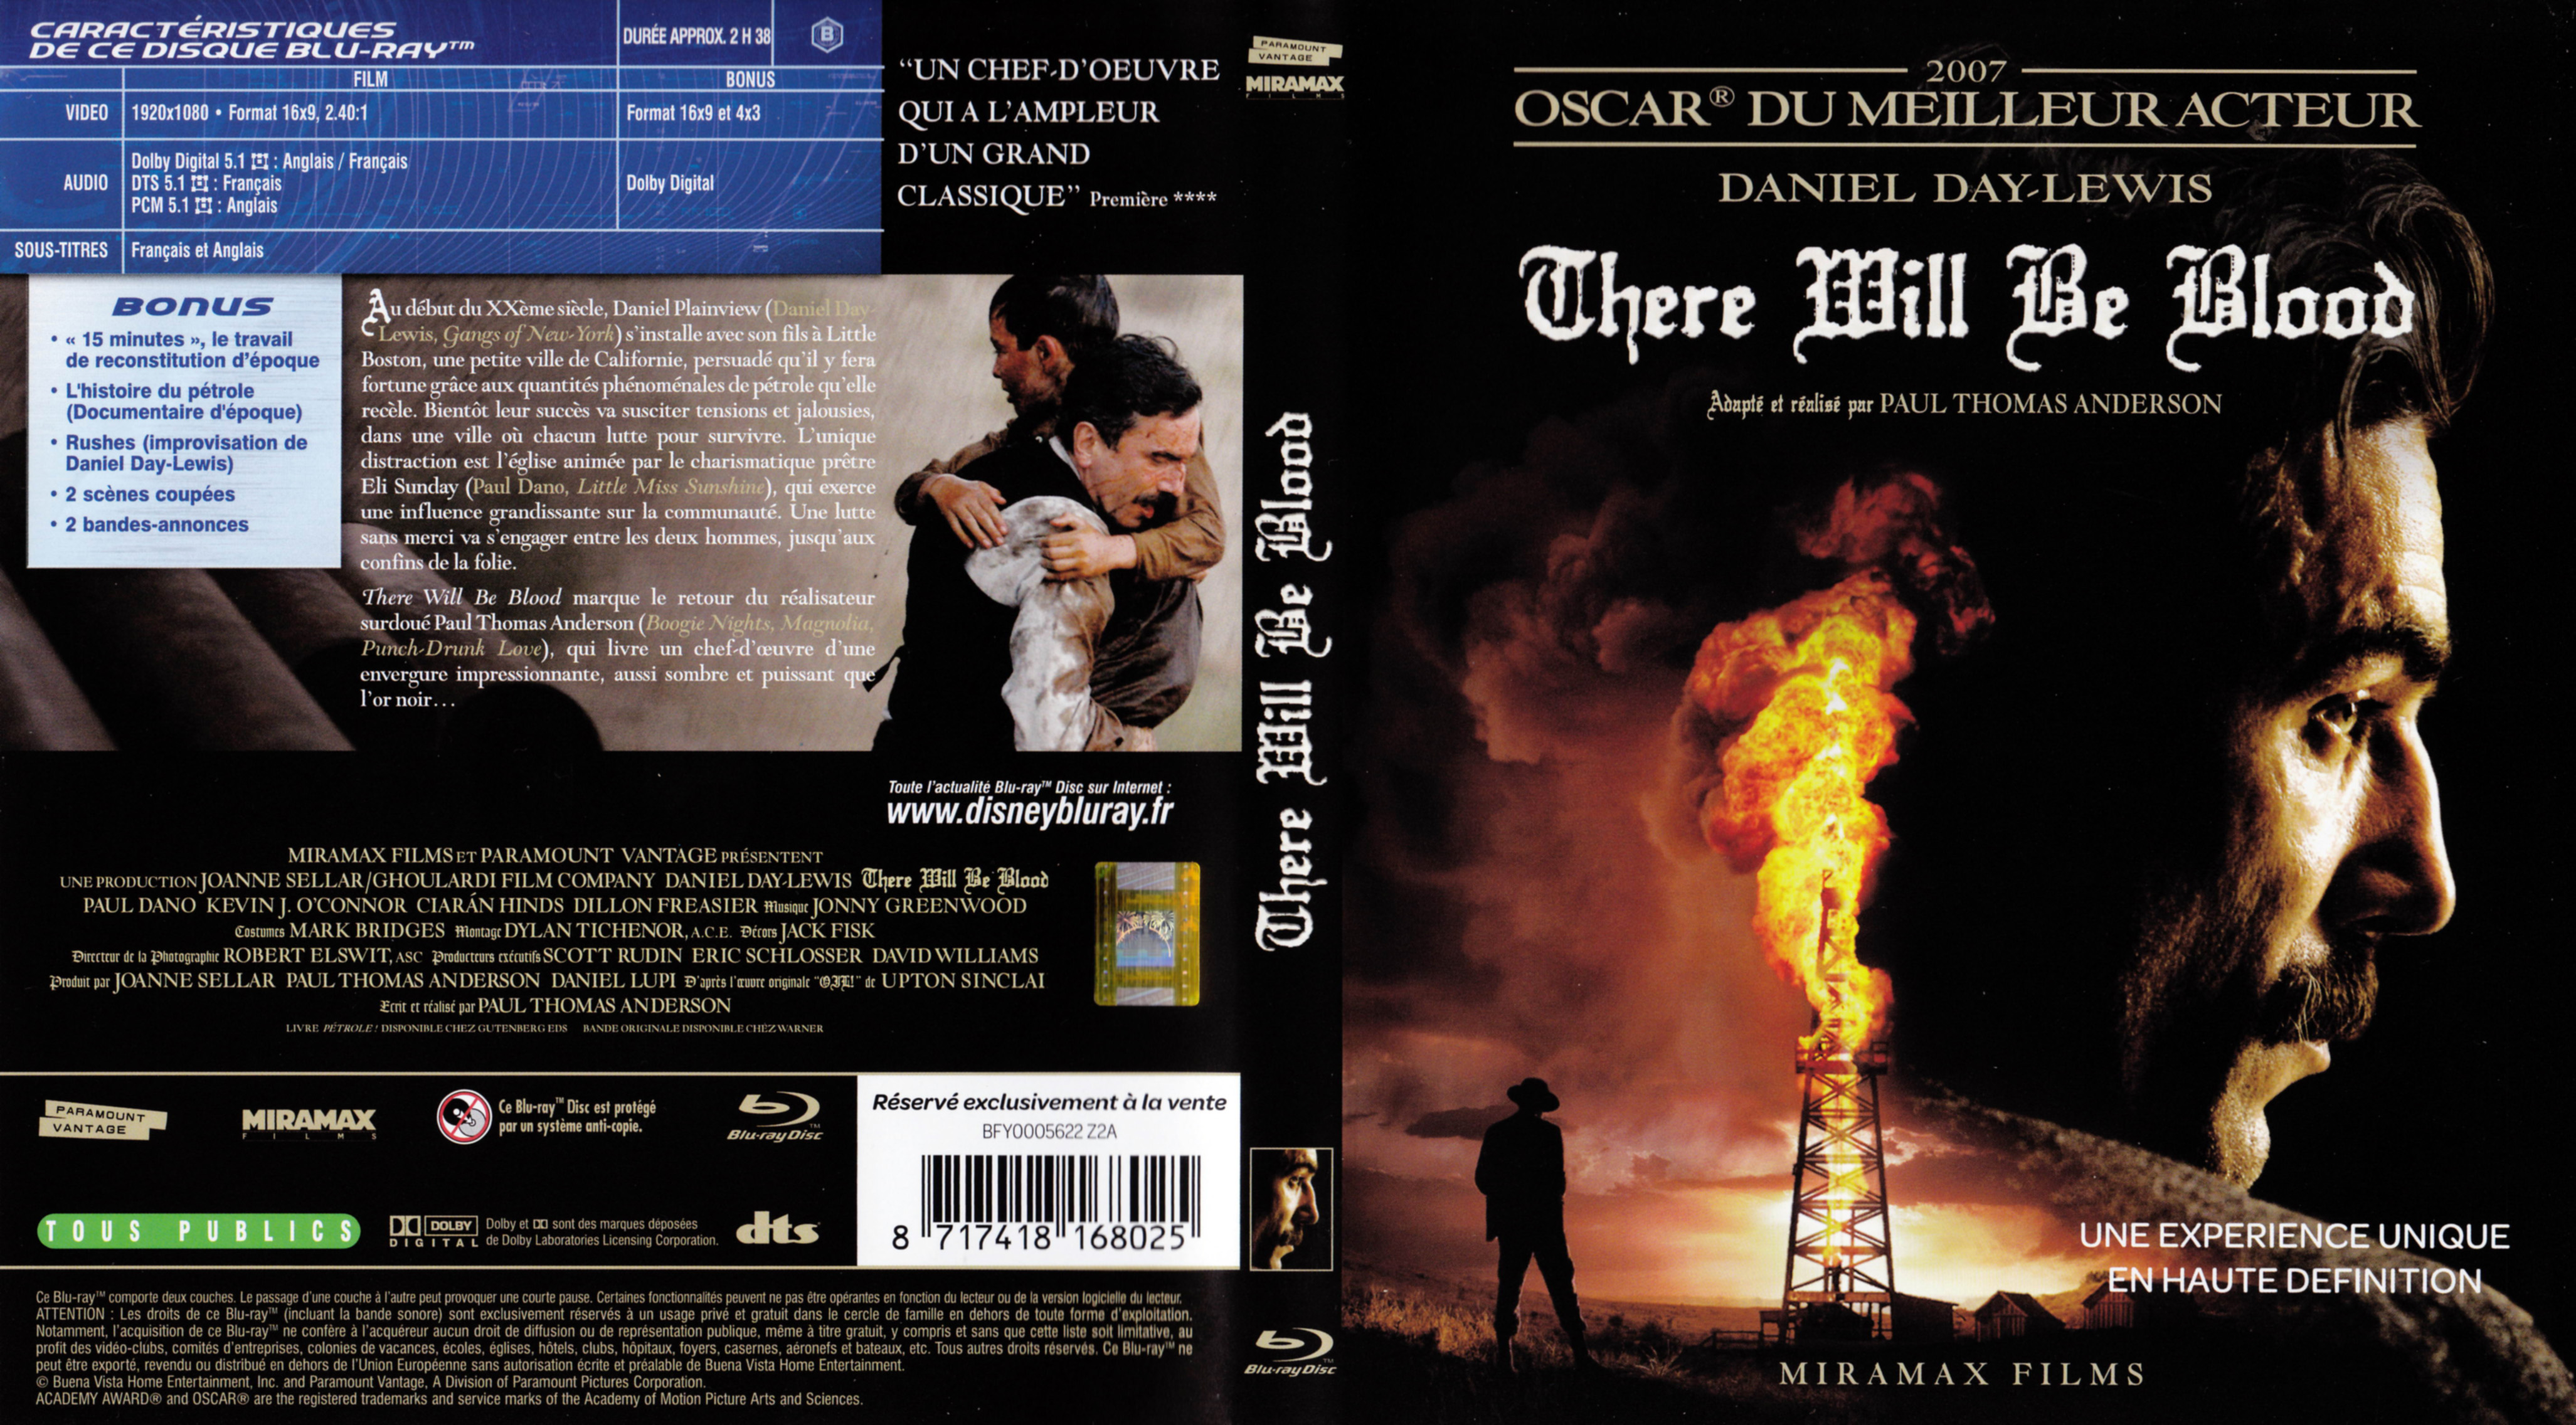 Jaquette DVD There will be blood (BLU-RAY)